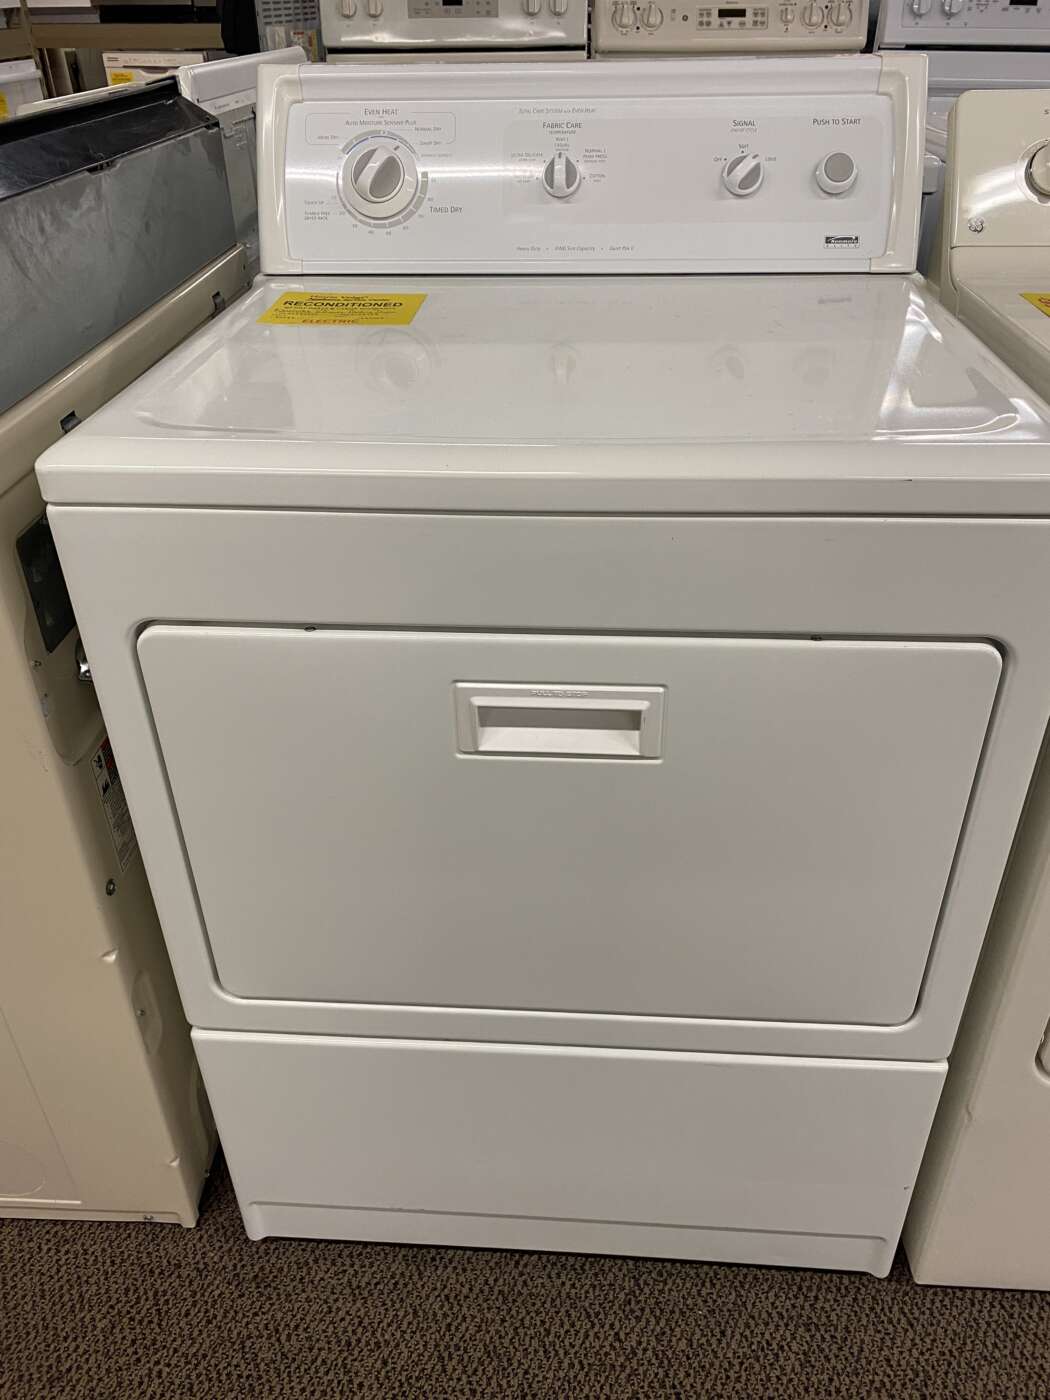 Reconditioned KENMORE 6.5 Cu. Ft. Electric dryer